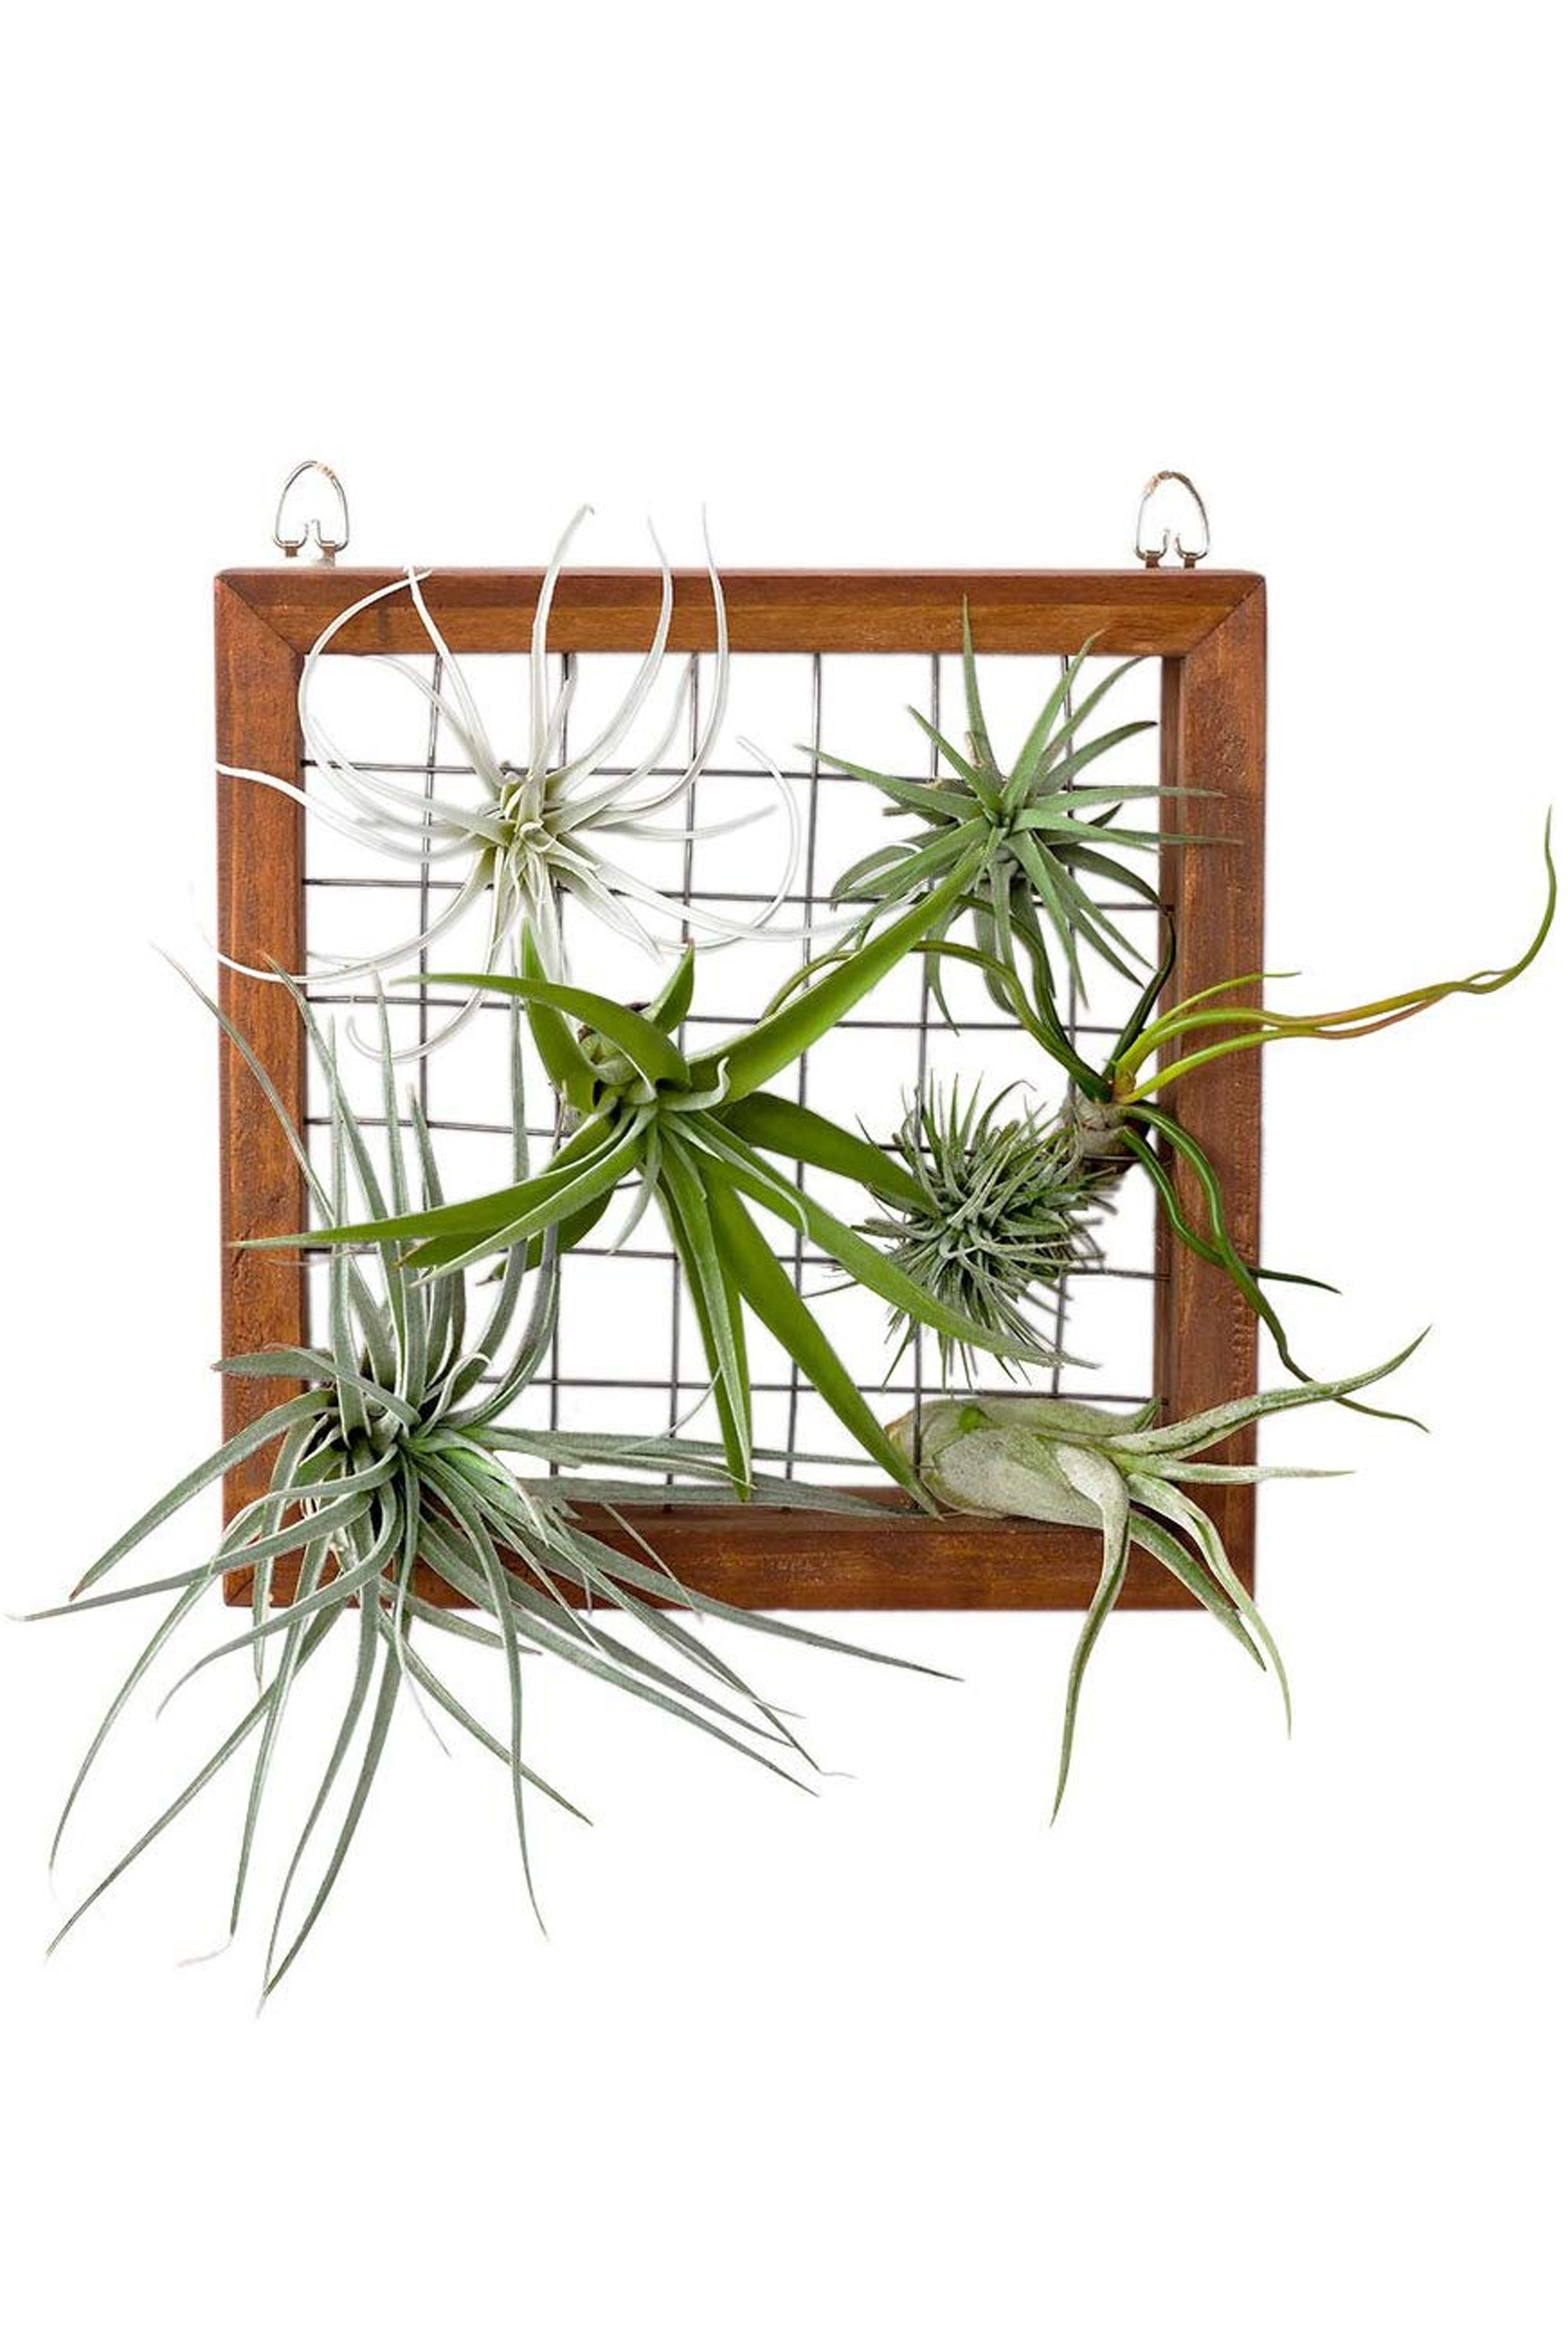 14 Creative Air Plant Display Ideas - Best Air Plants for Indoors